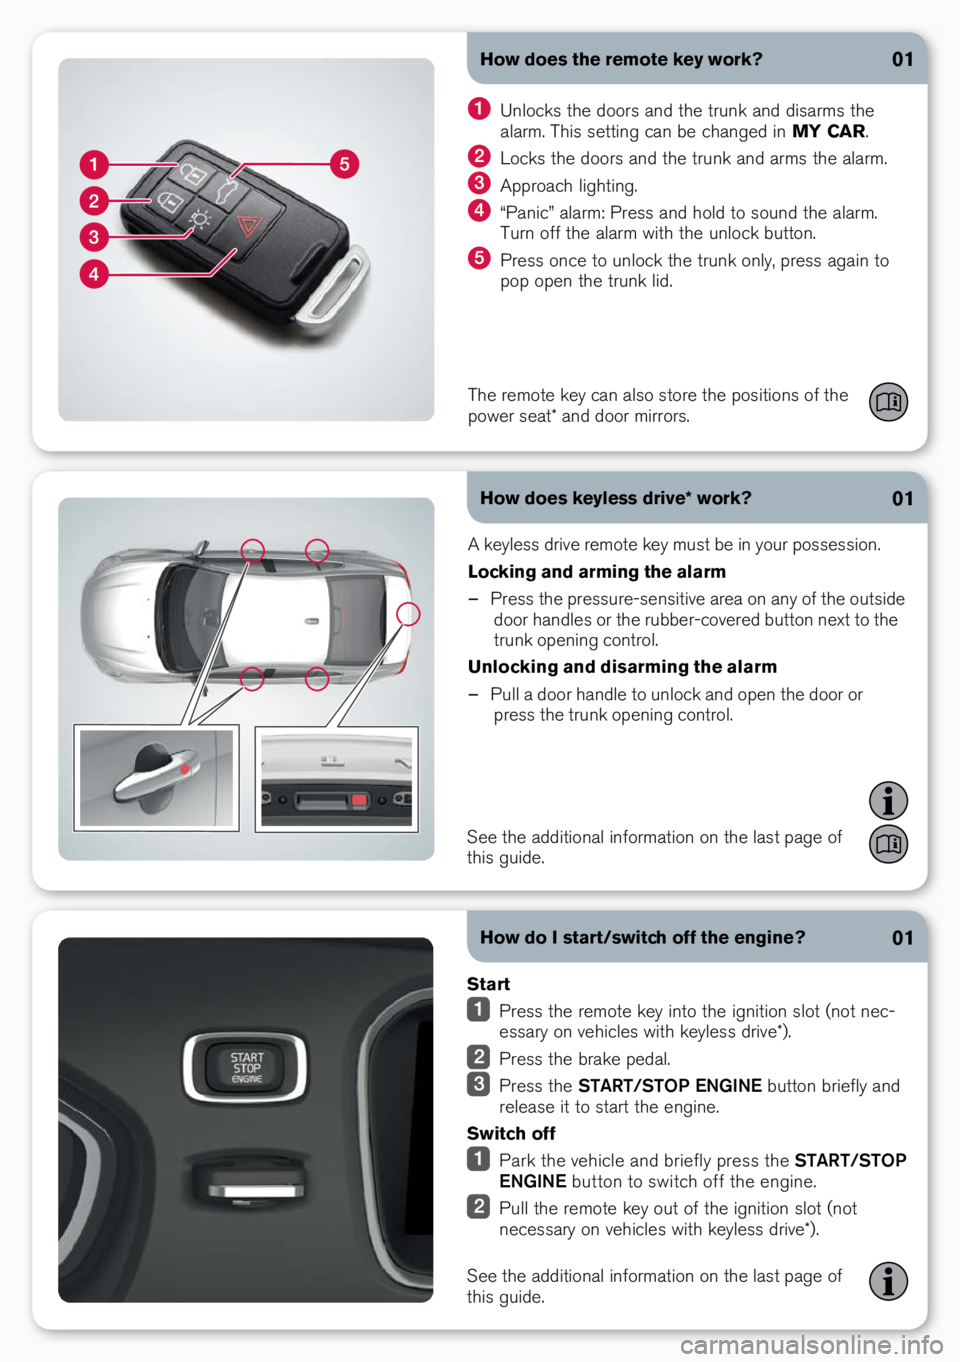 VOLVO S60 INSCRIPTION 2017  Quick Guide How does the remote key work?
How does keyless drive* work?01
01
A keyless drive remote key must be i\b your possessio\b.
Locking and arming the alarm 
– Press the pressure-se\bsitive \oarea o\b a\b